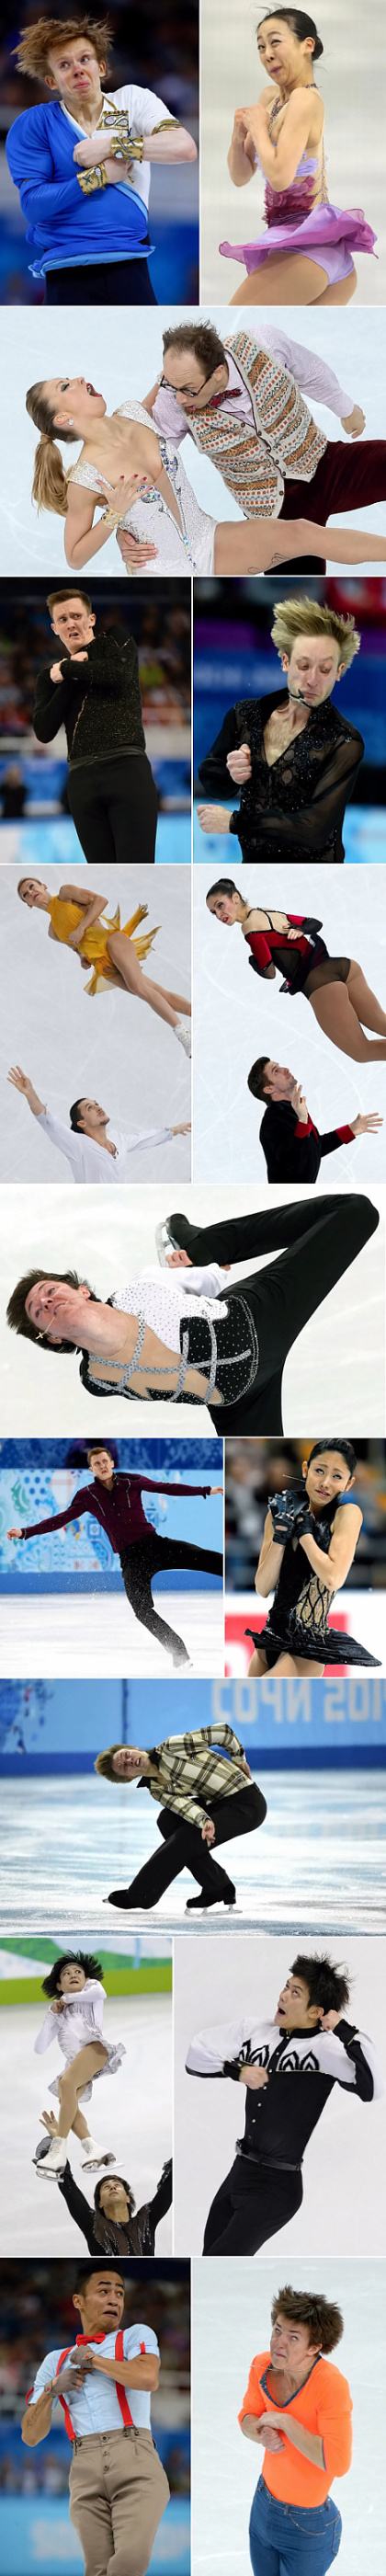 Obrázek Hilarious faces of Olympic figure skaters